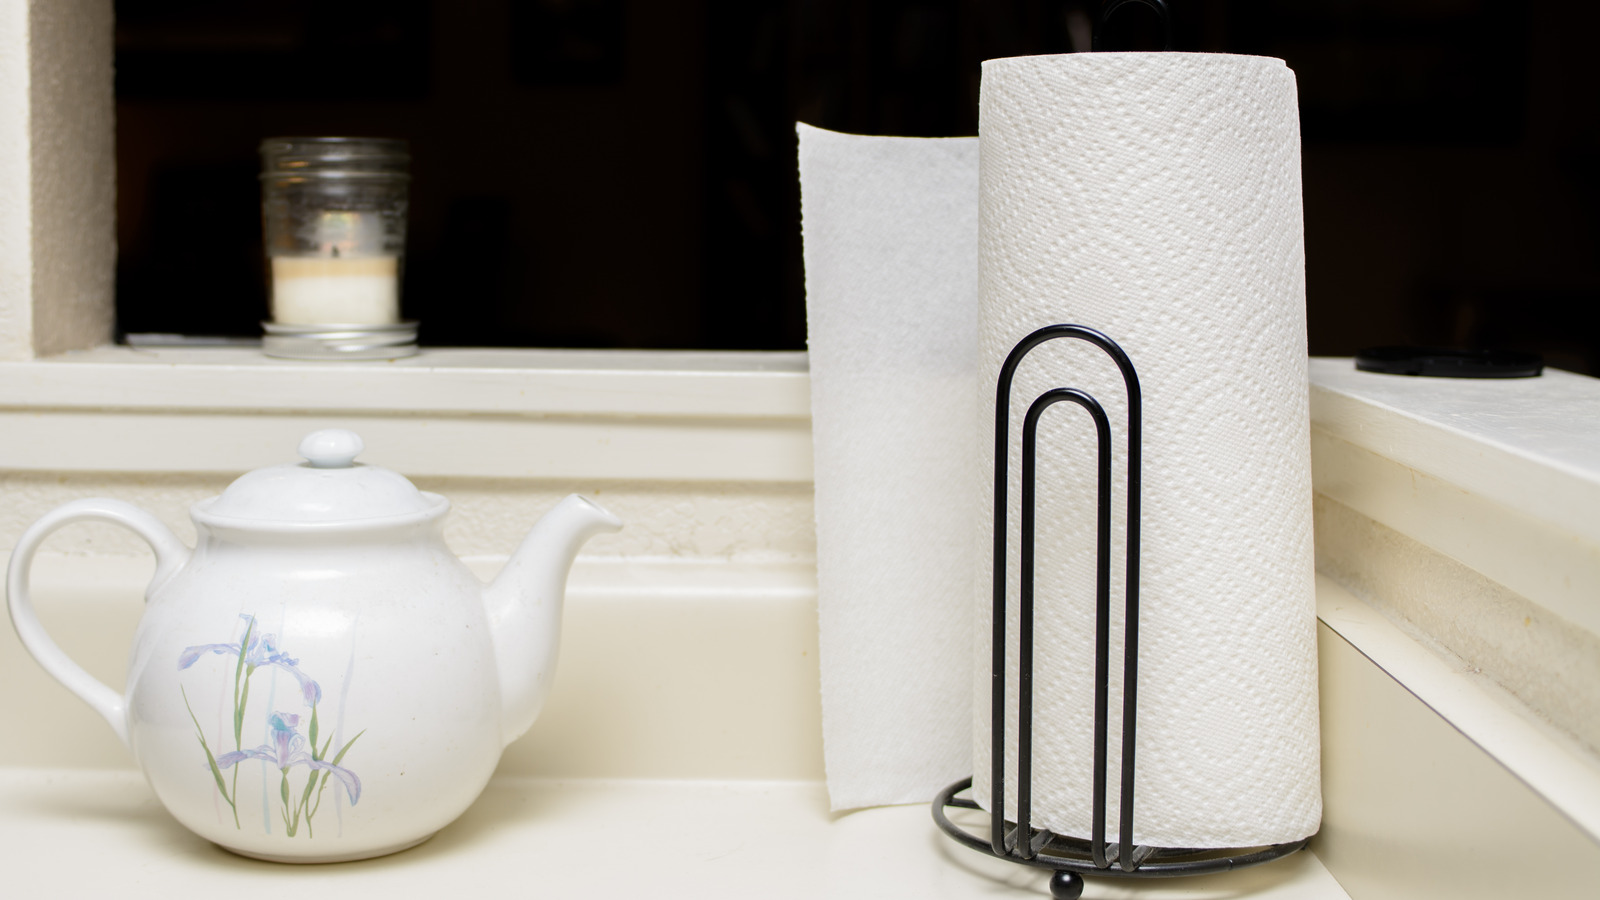 https://www.housedigest.com/img/gallery/the-tiktok-paper-towel-holder-hack-that-has-the-internet-divided/l-intro-1701725872.jpg